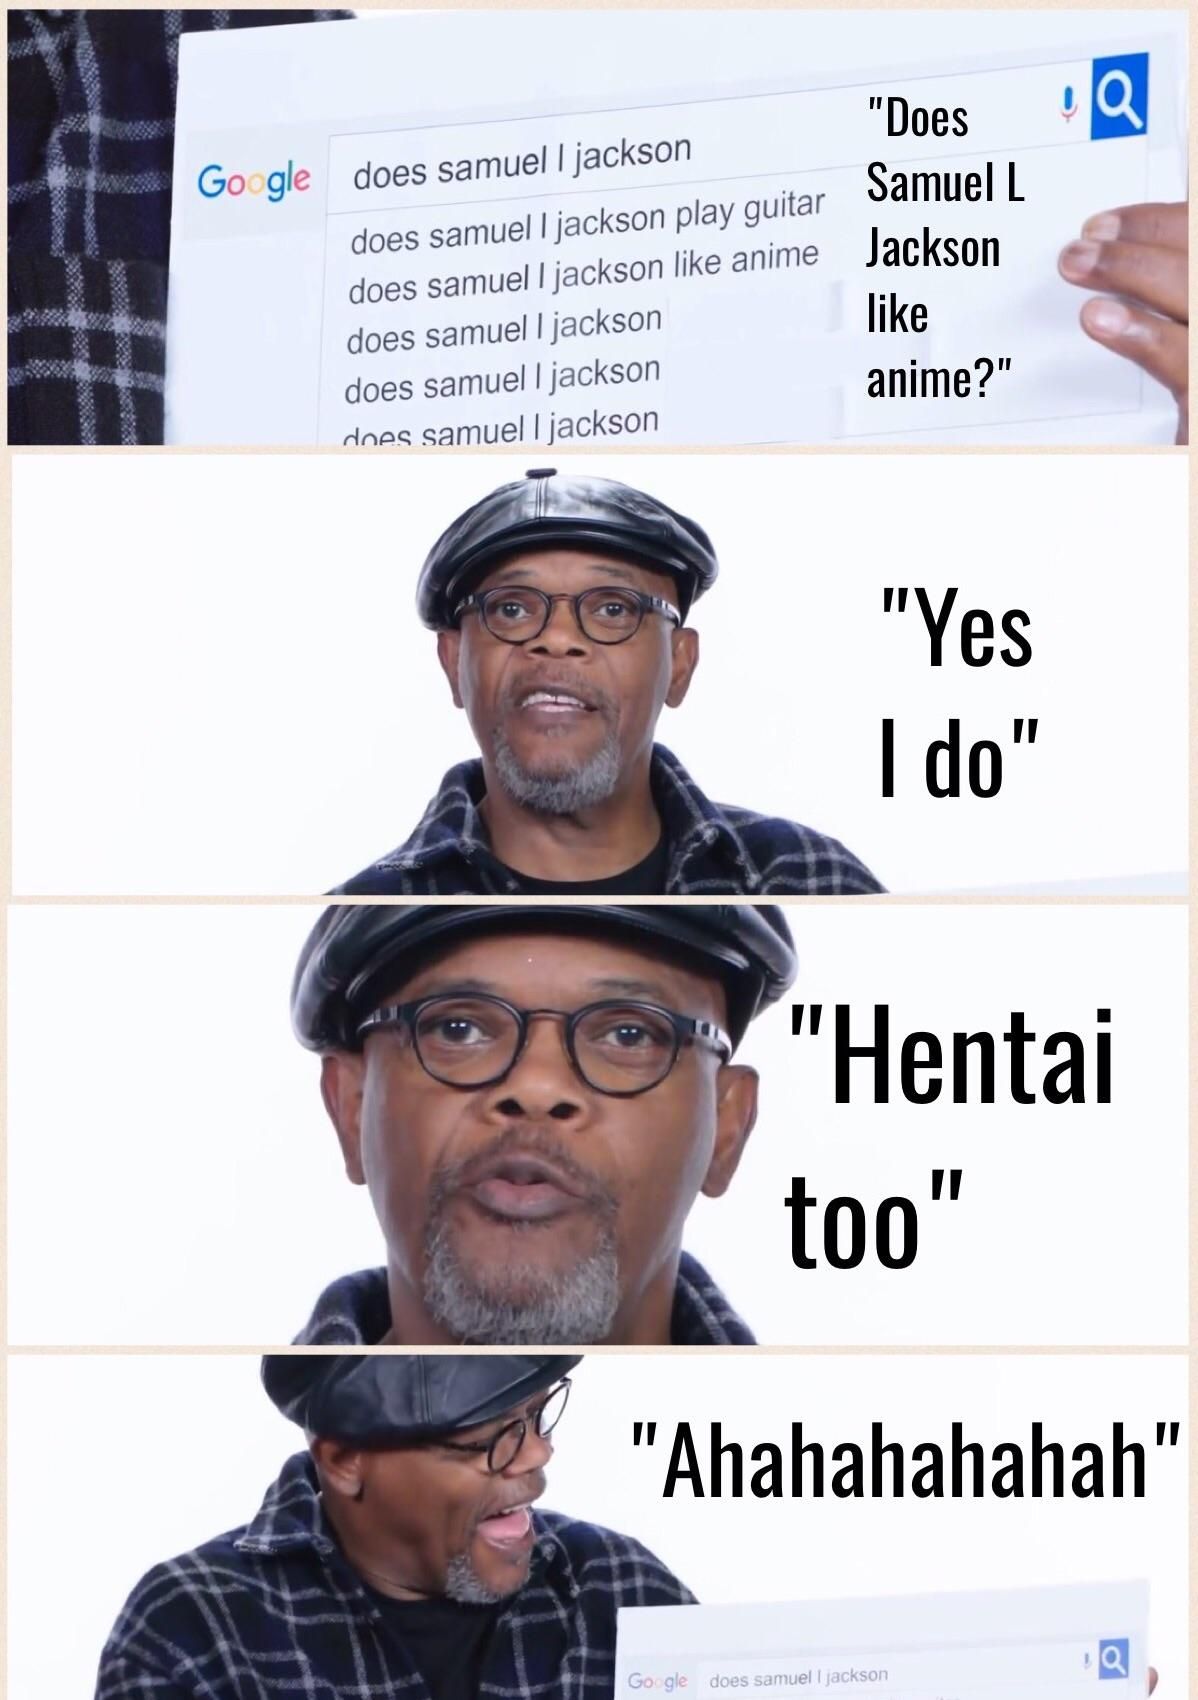 This is why Samuel L Jackson is the best actor